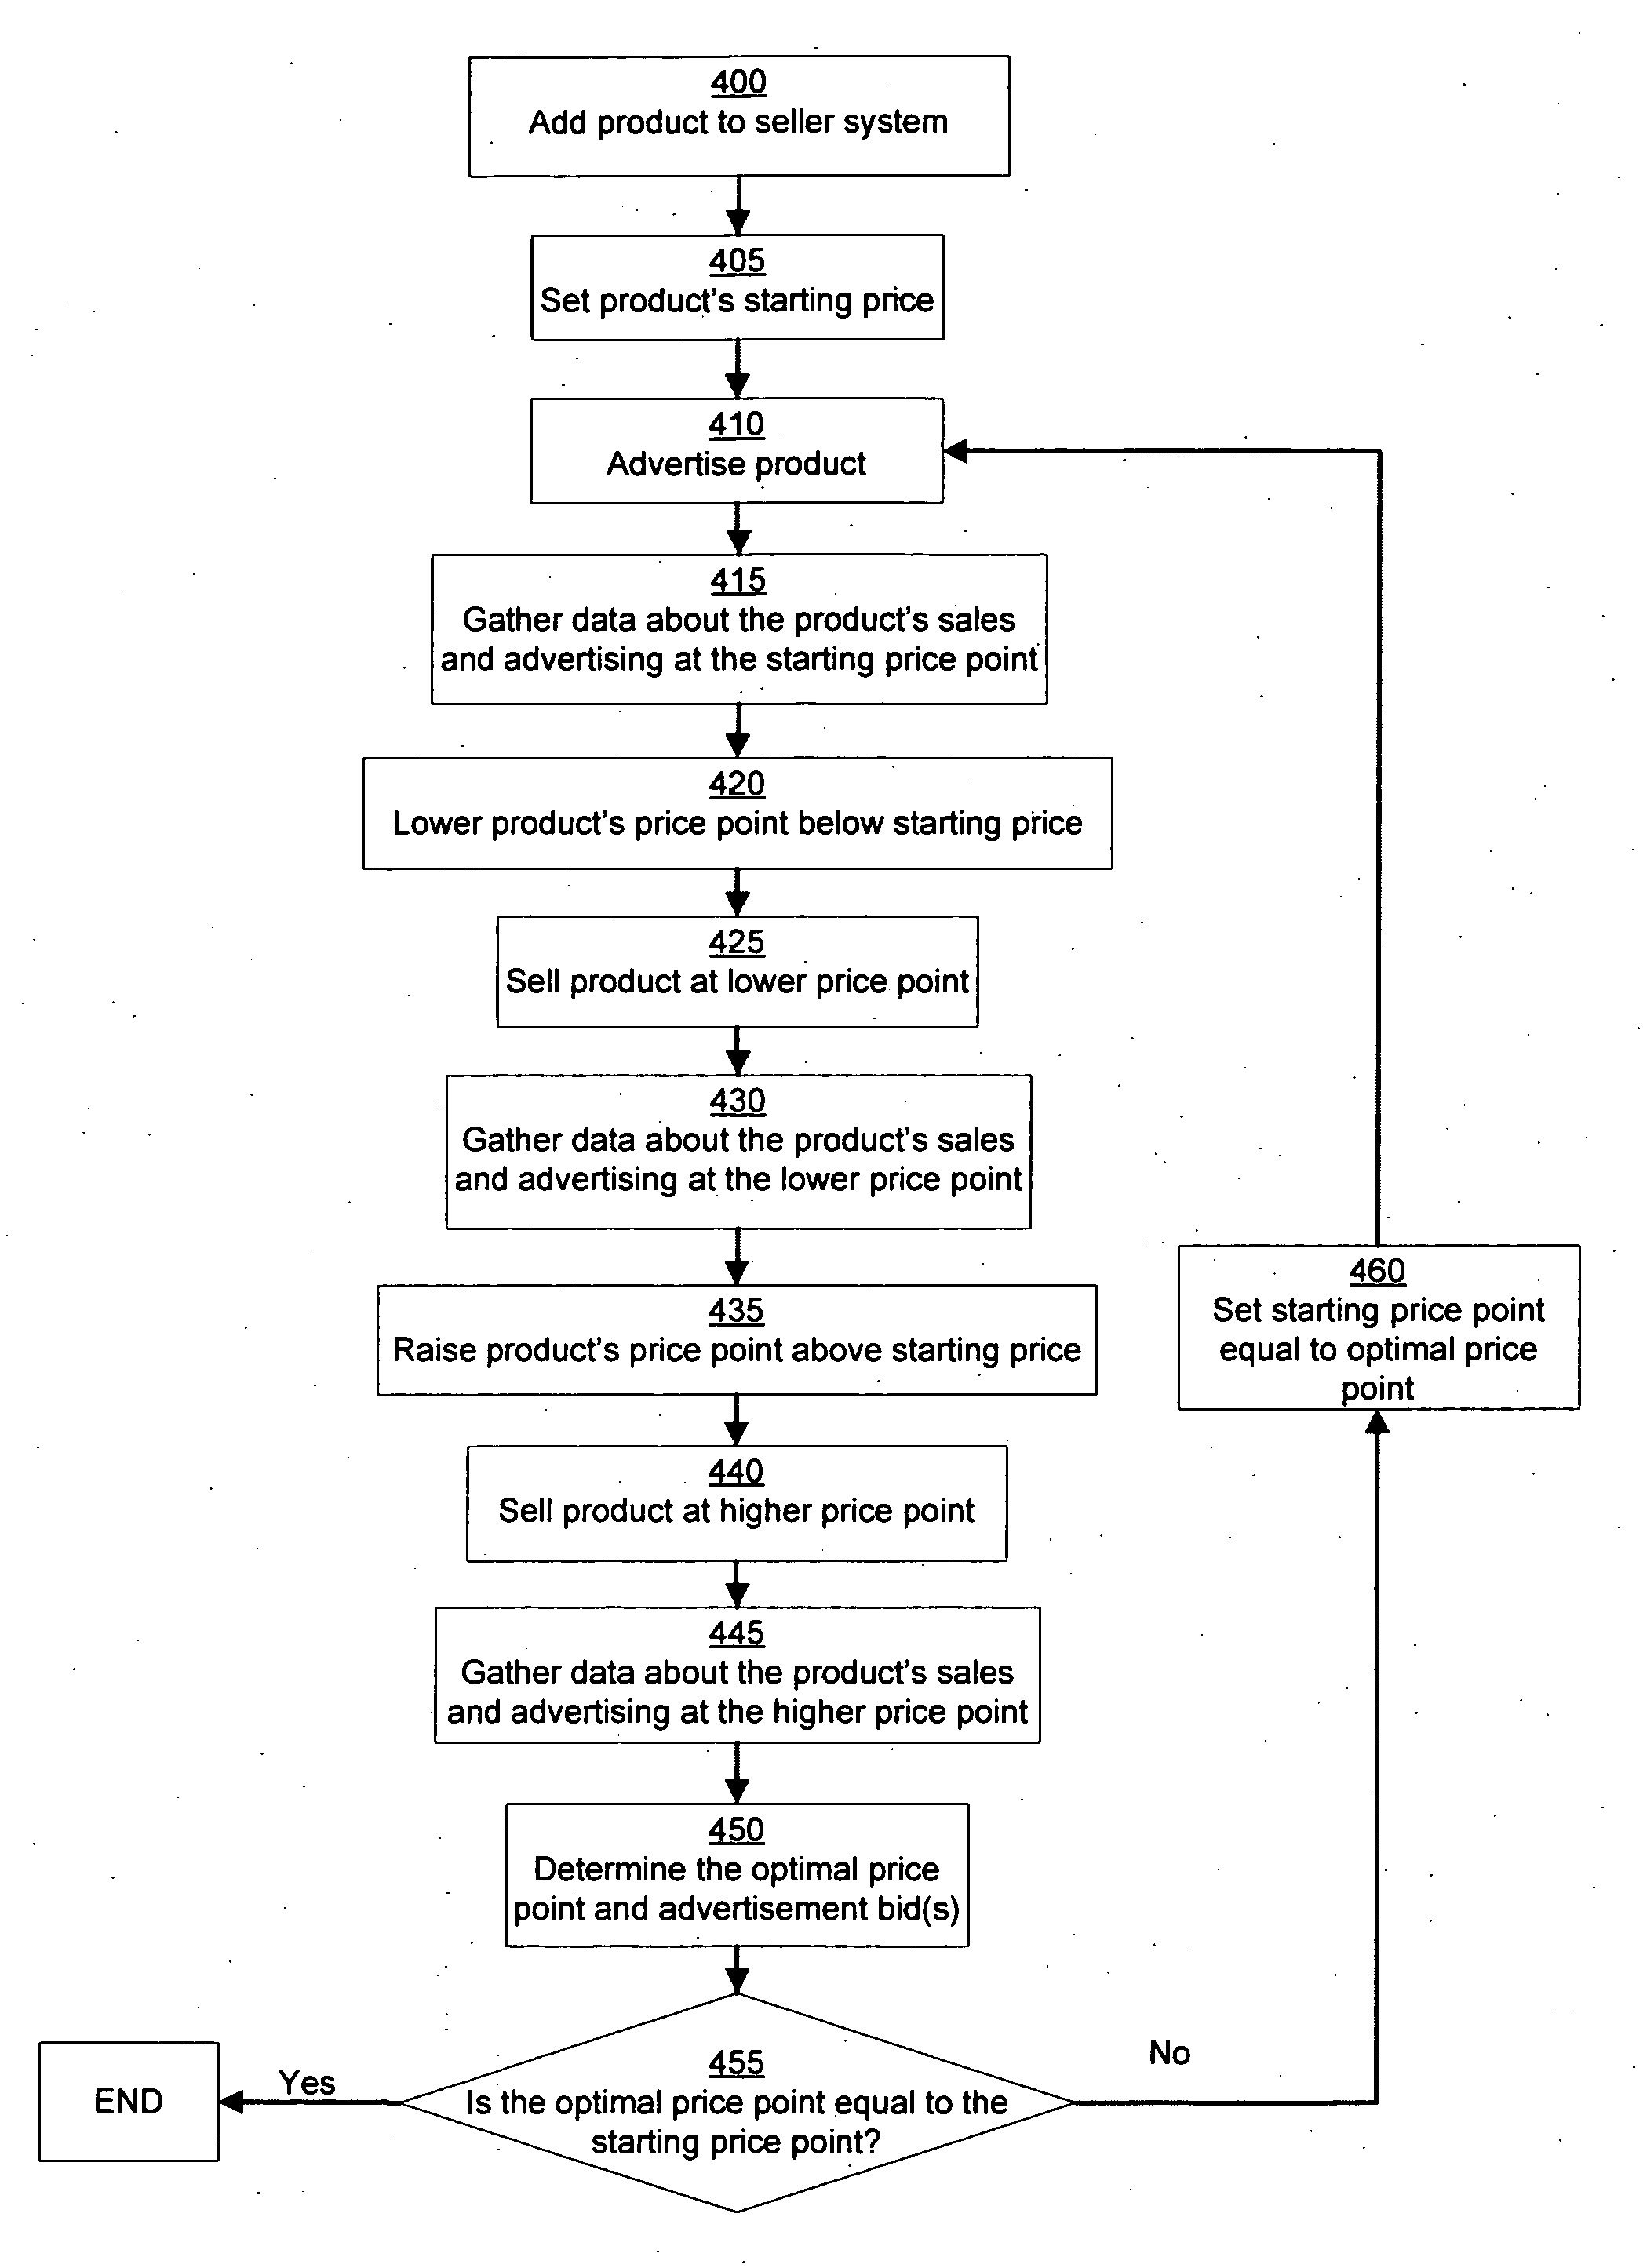 System and method for updating product pricing and advertising bids